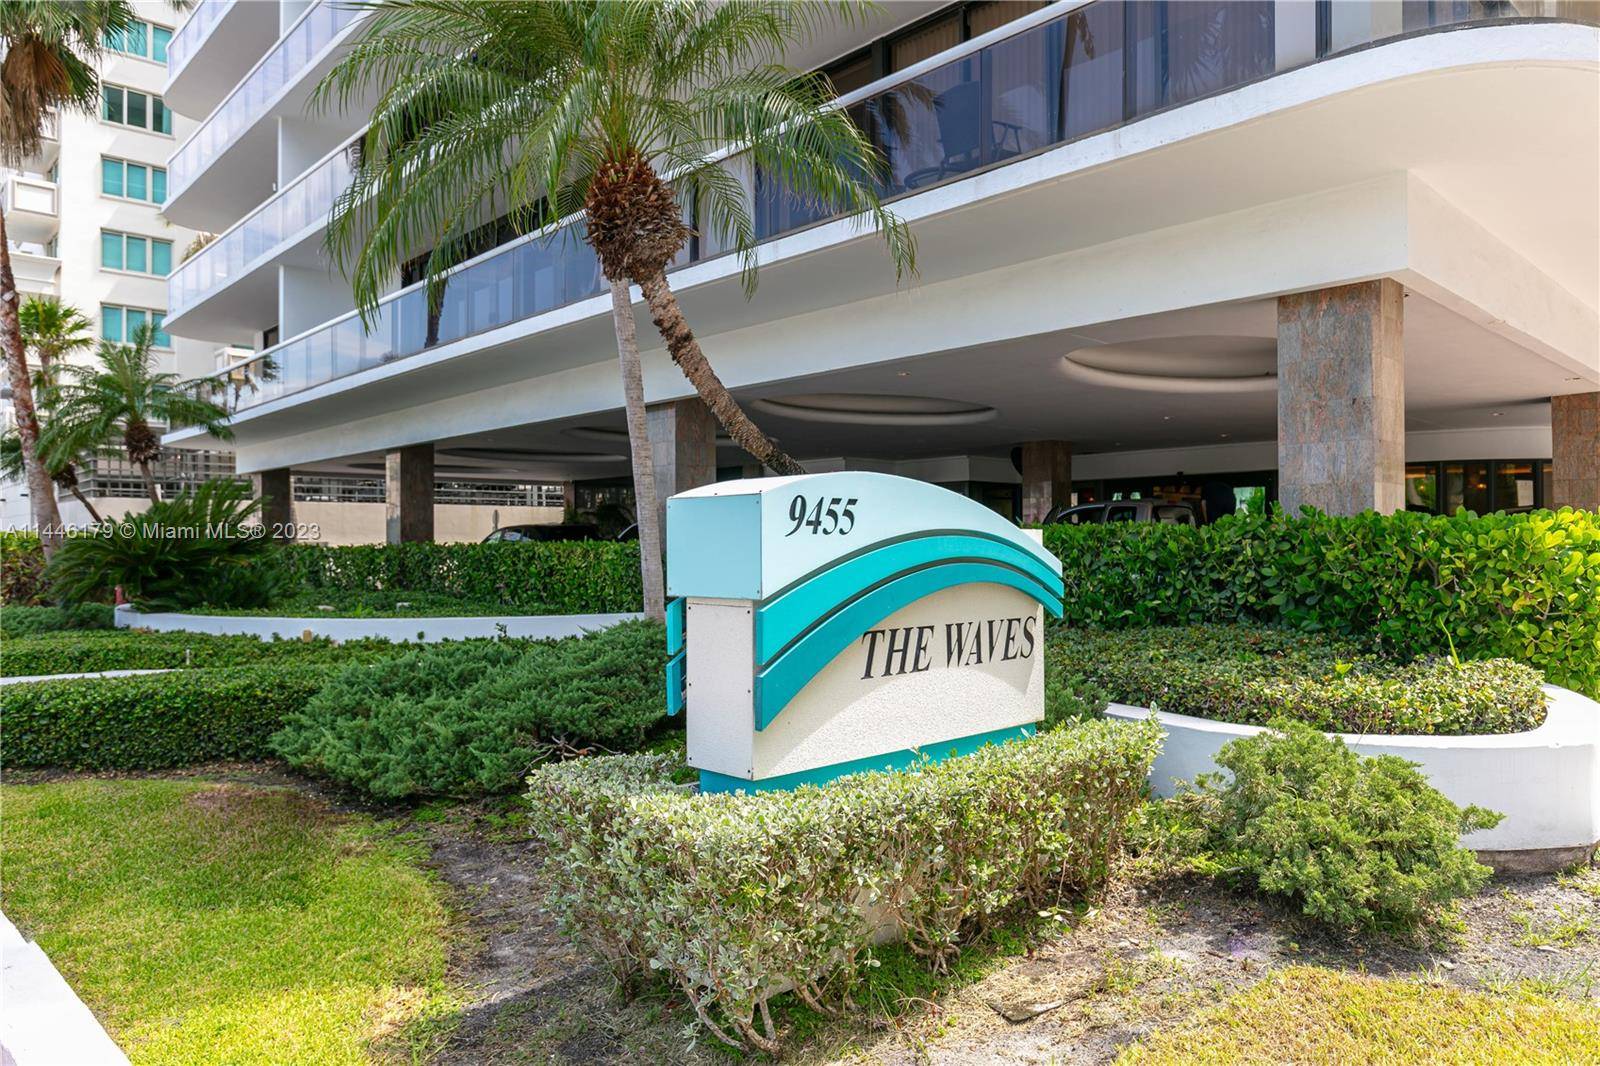 Premium location ! Ready to move in condo unit at The Waves in heart of Surfside.